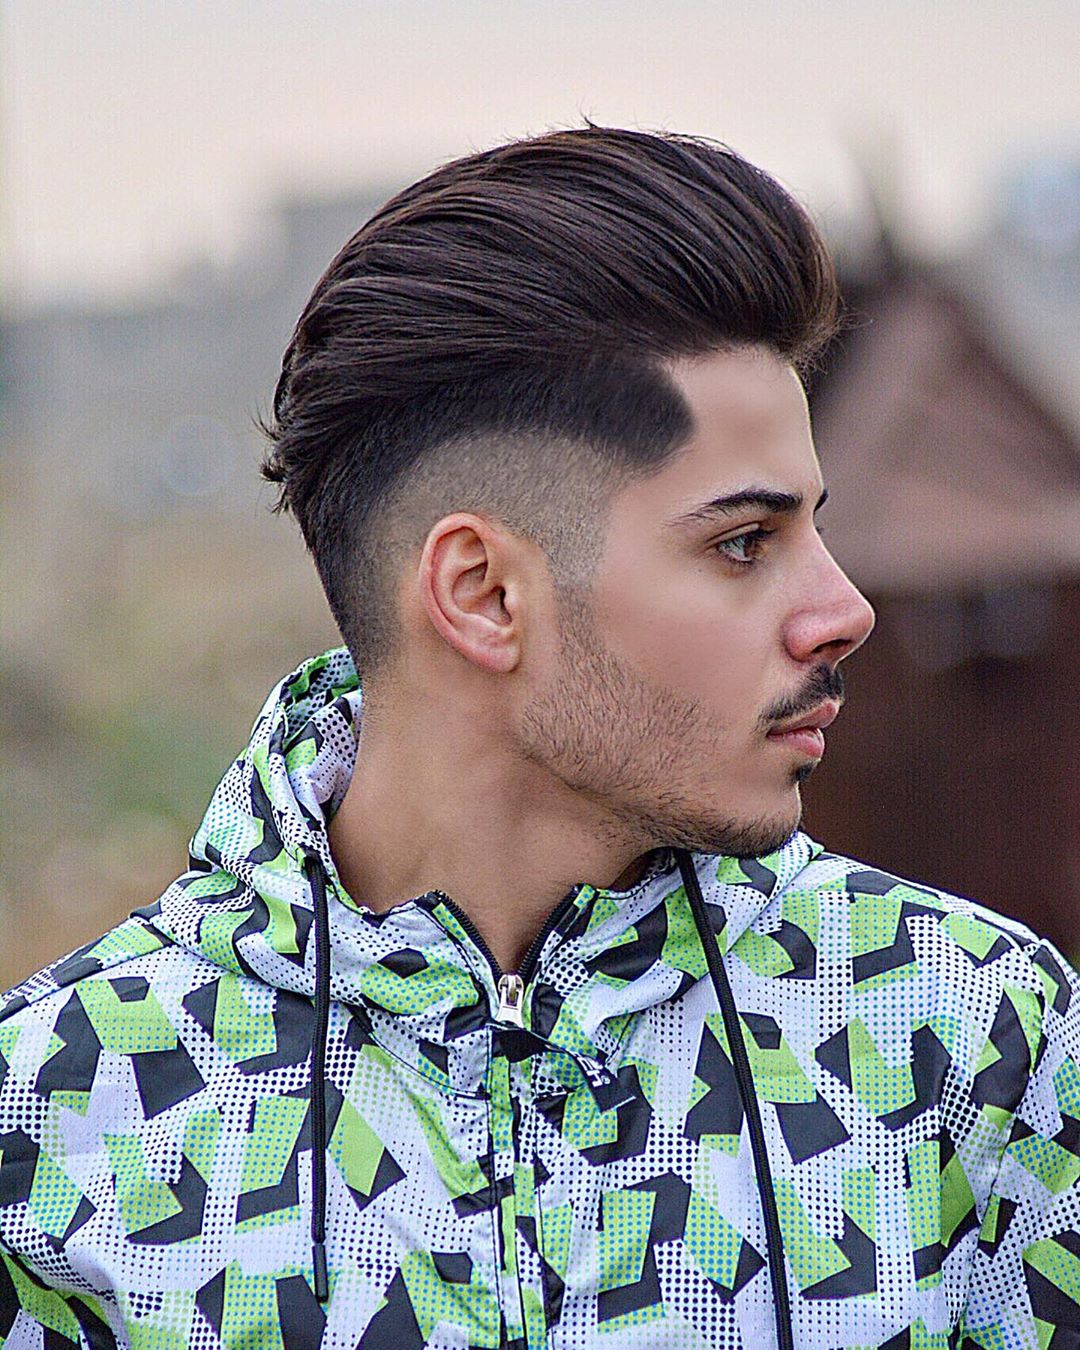 14 Awesome Slicked Back Hairstyle Ideas for Guys